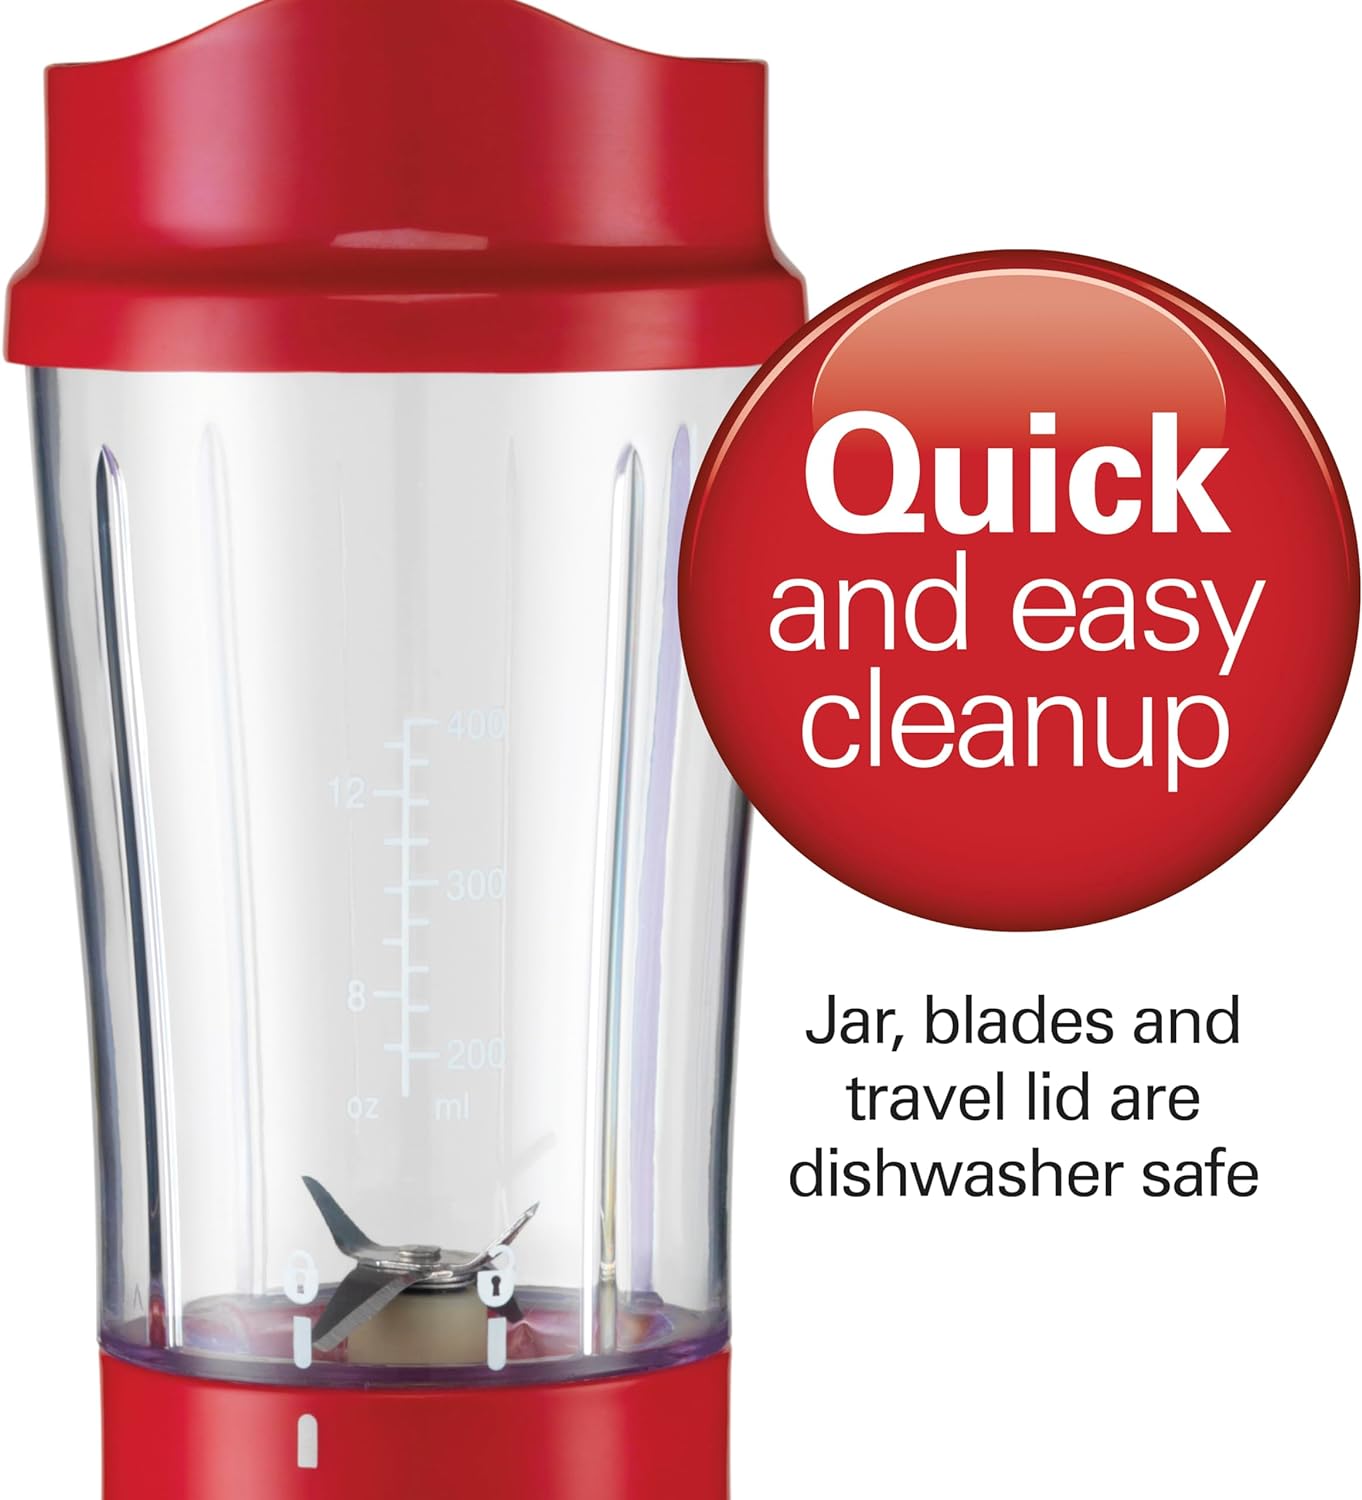 Hamilton Beach Personal Creations Single-Serve Blender + Travel Cup – Red